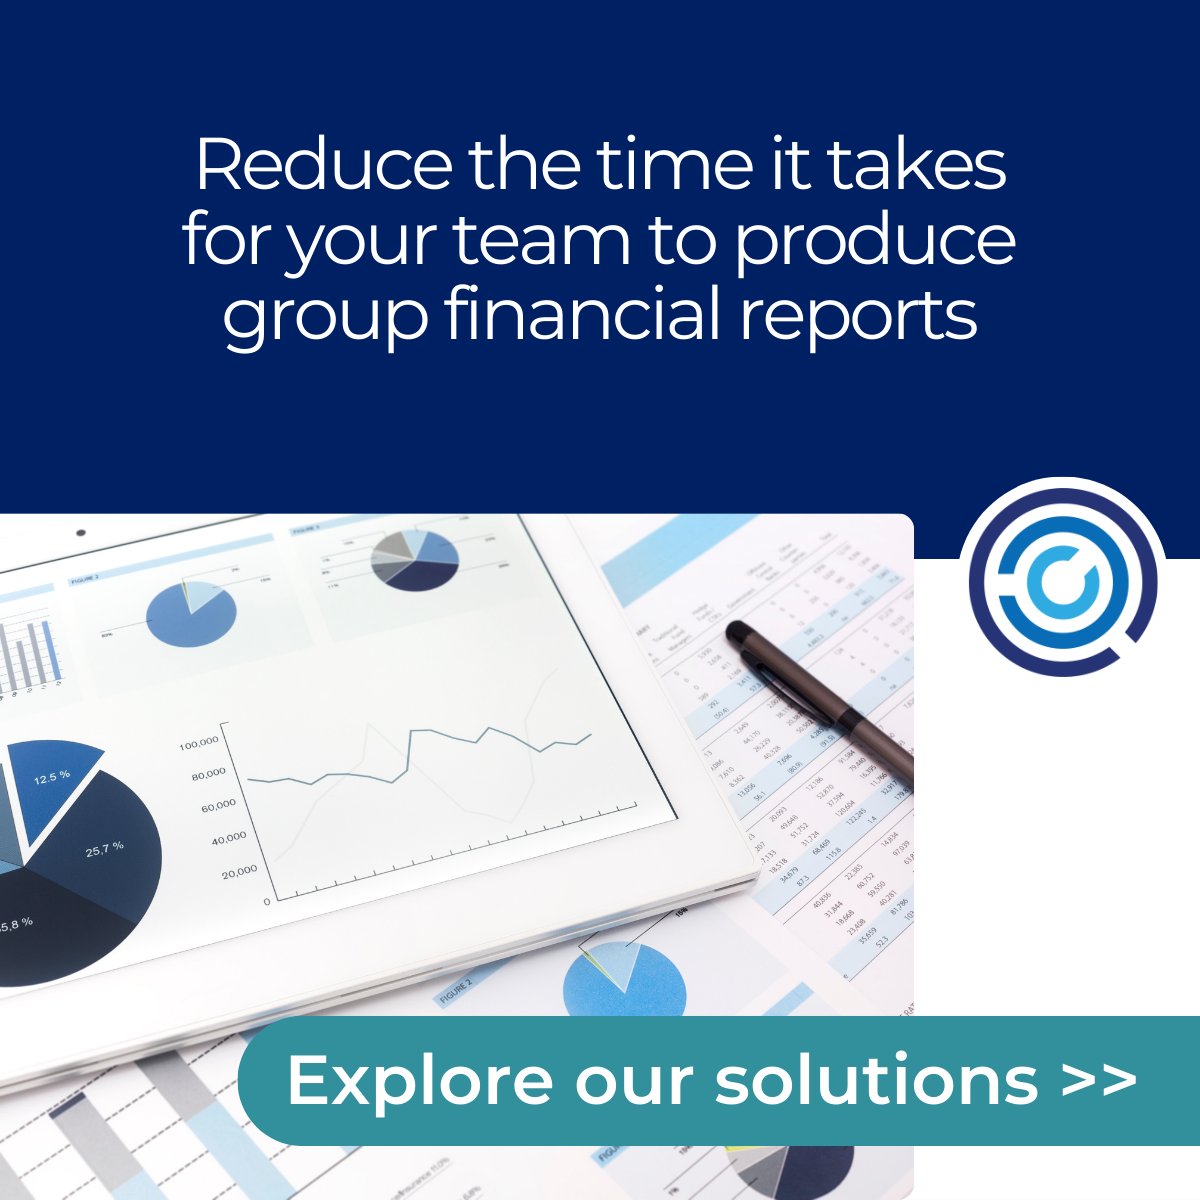 Accelerate production of group financial reports by equipping your team with the technology to manage rolling #forecasts and scenario plans. Visit our website for more information on best-fit solutions >> concentricsolutions.com/solutions/fina… #financialplanning #financialanalysis